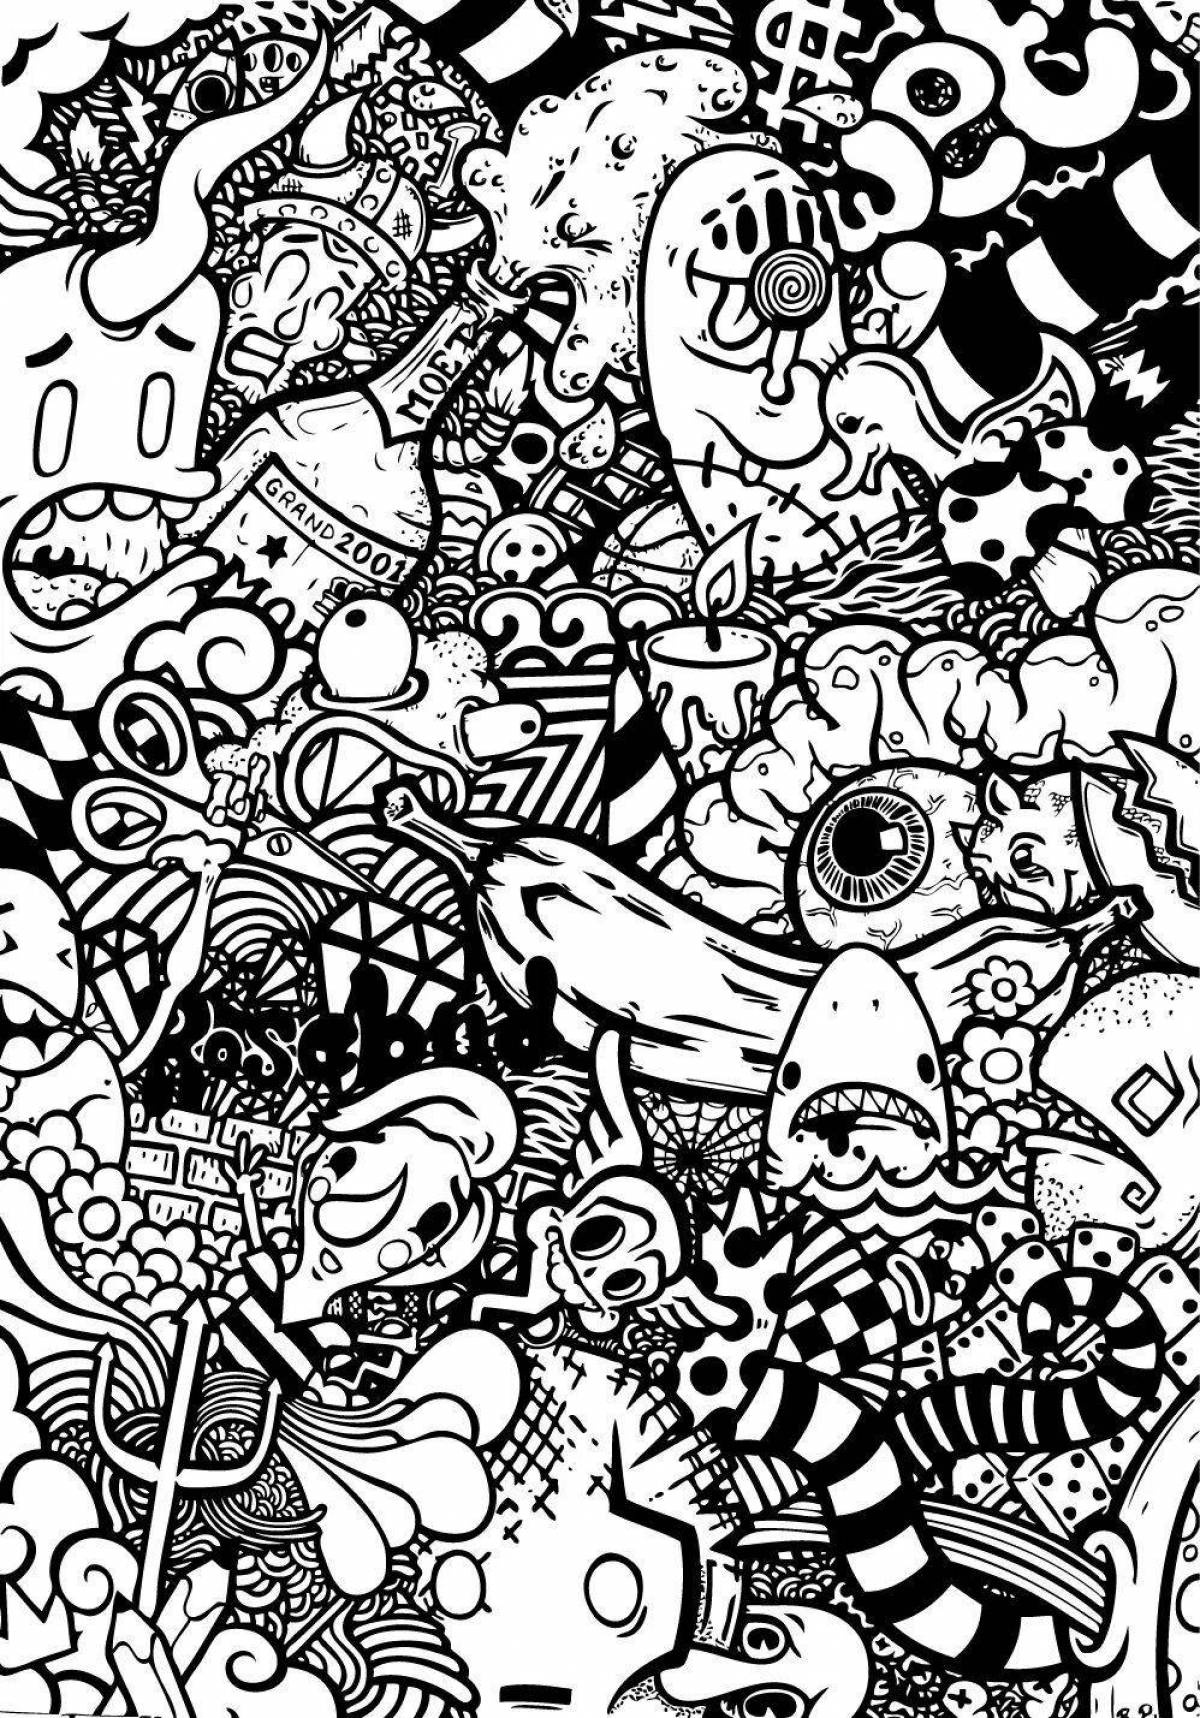 Dazzling psychedelic coloring book